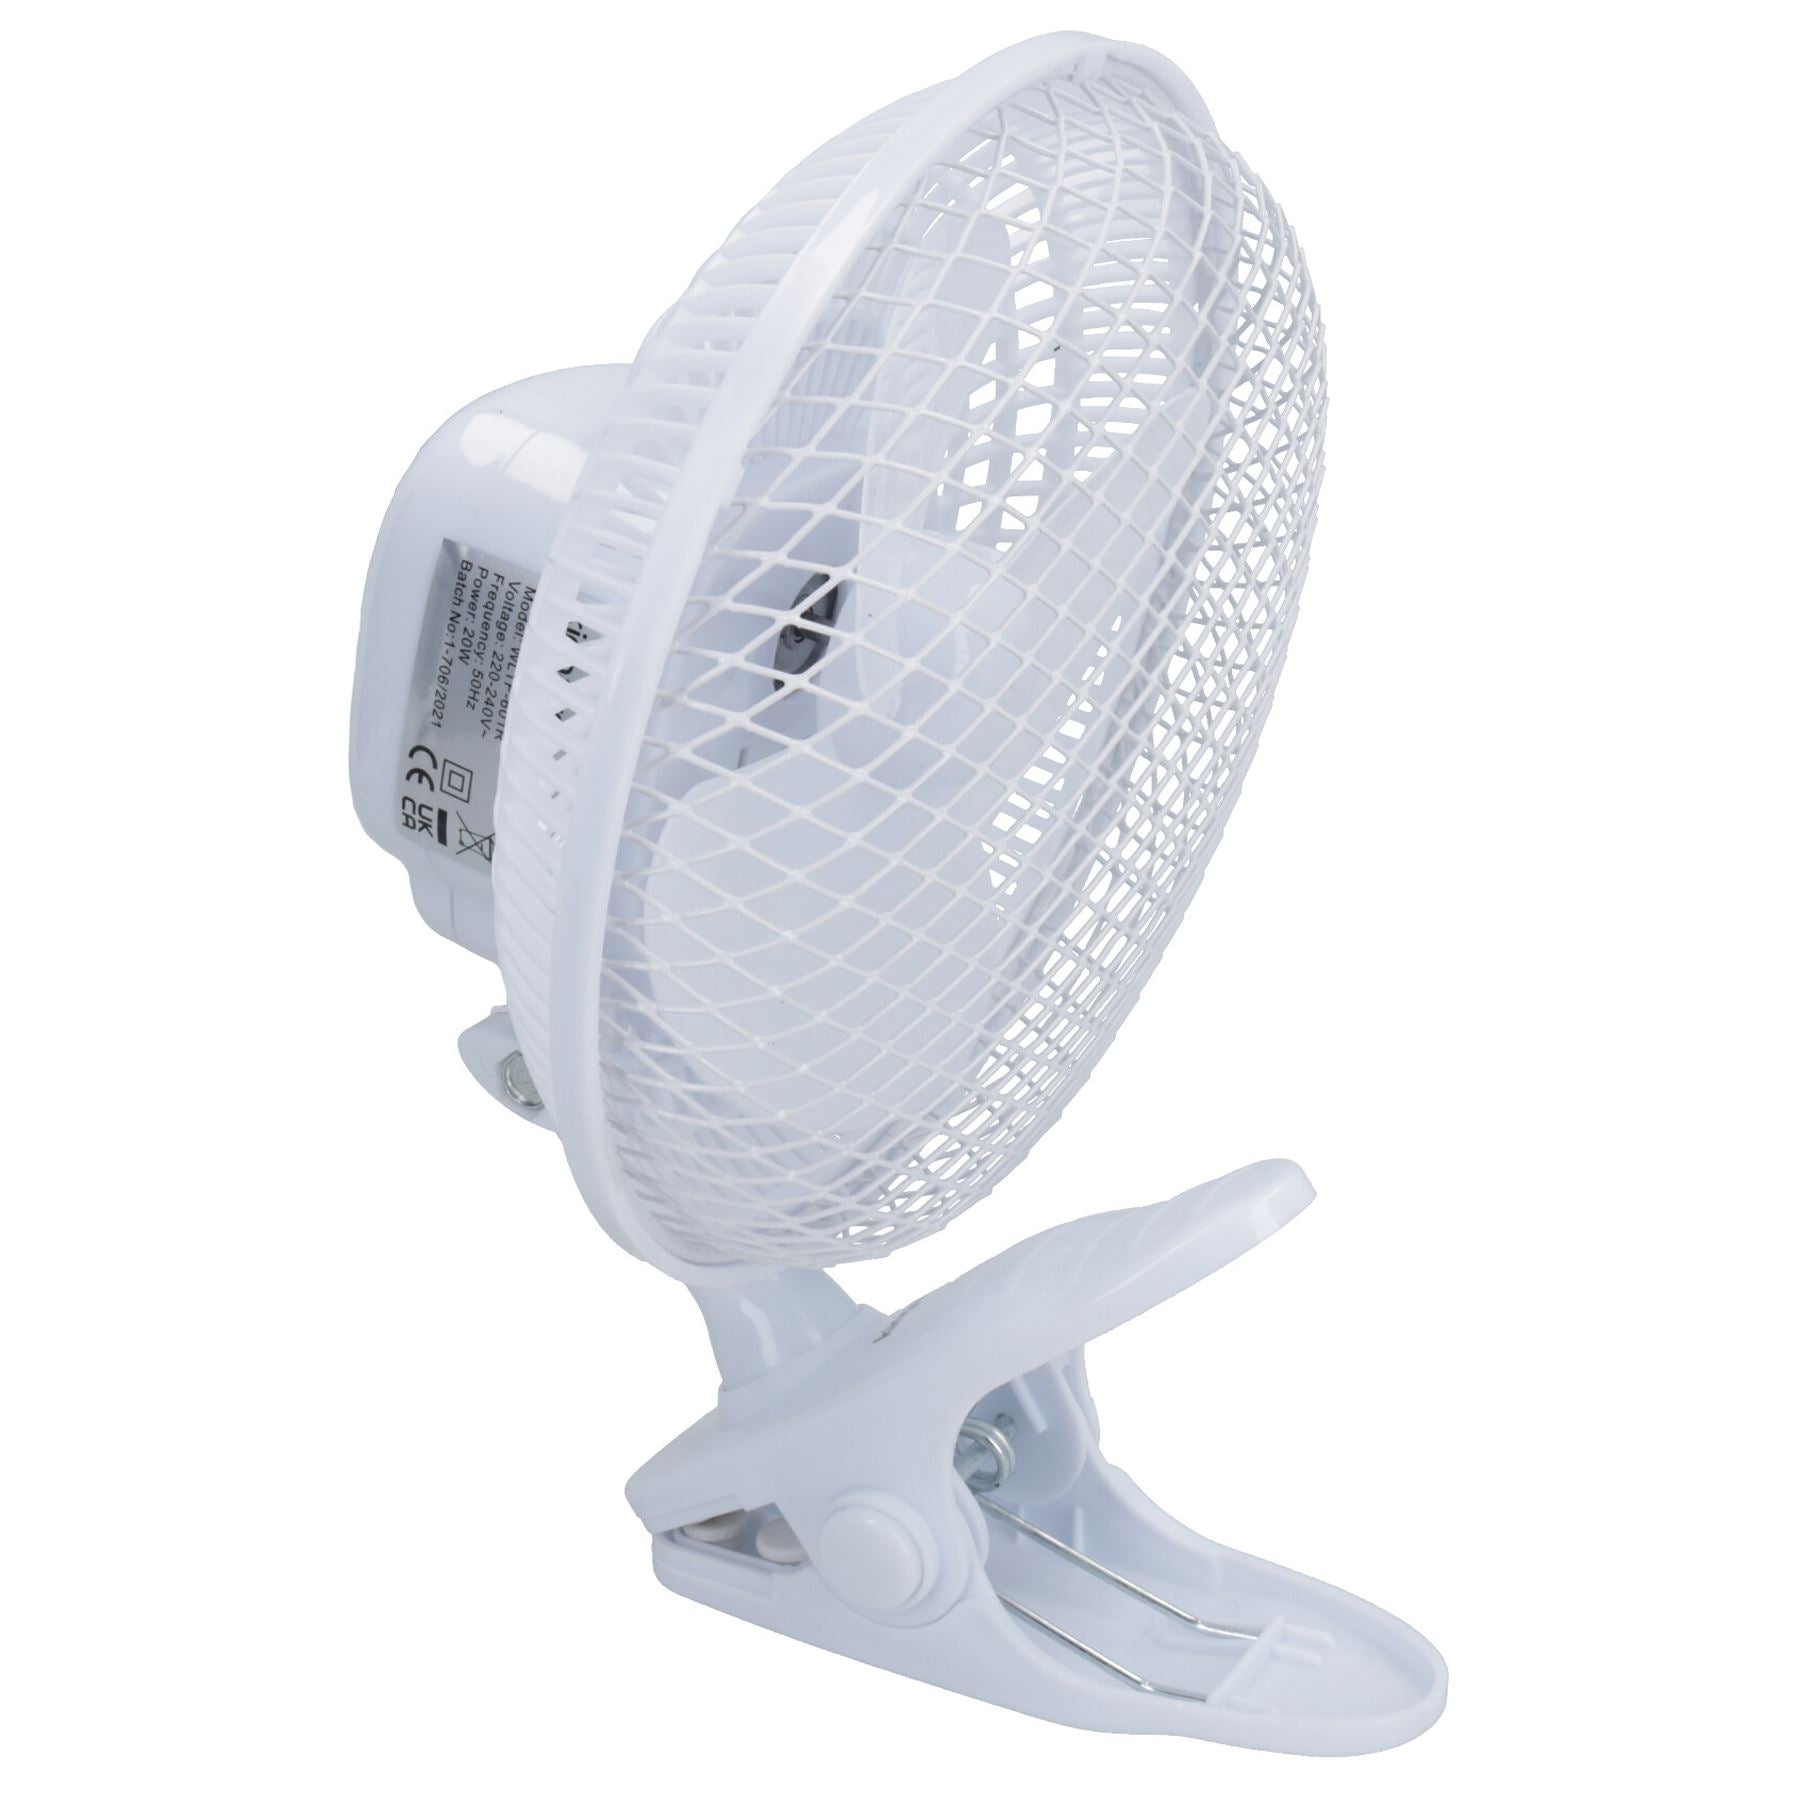 Portable 6” Desk Fan With Clip Cooling 2 Speed Home Office UK Plug